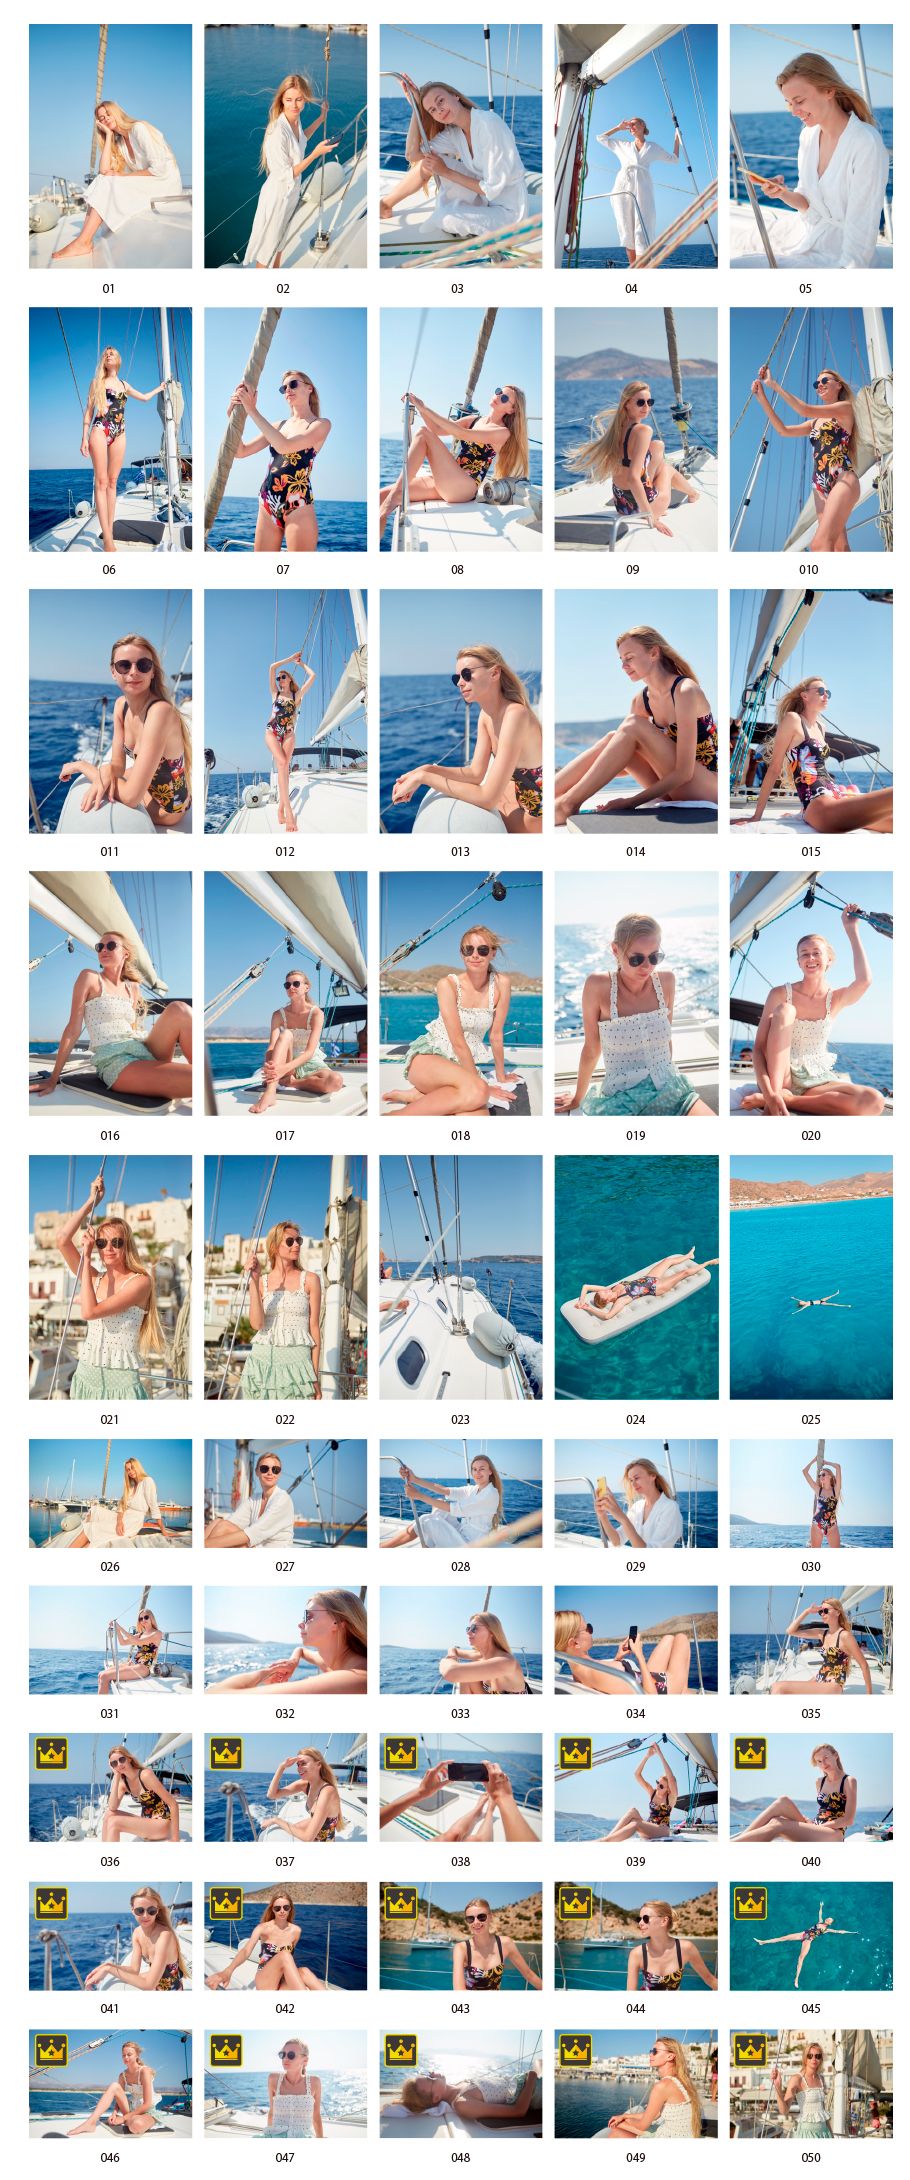 Yacht cruising pictures